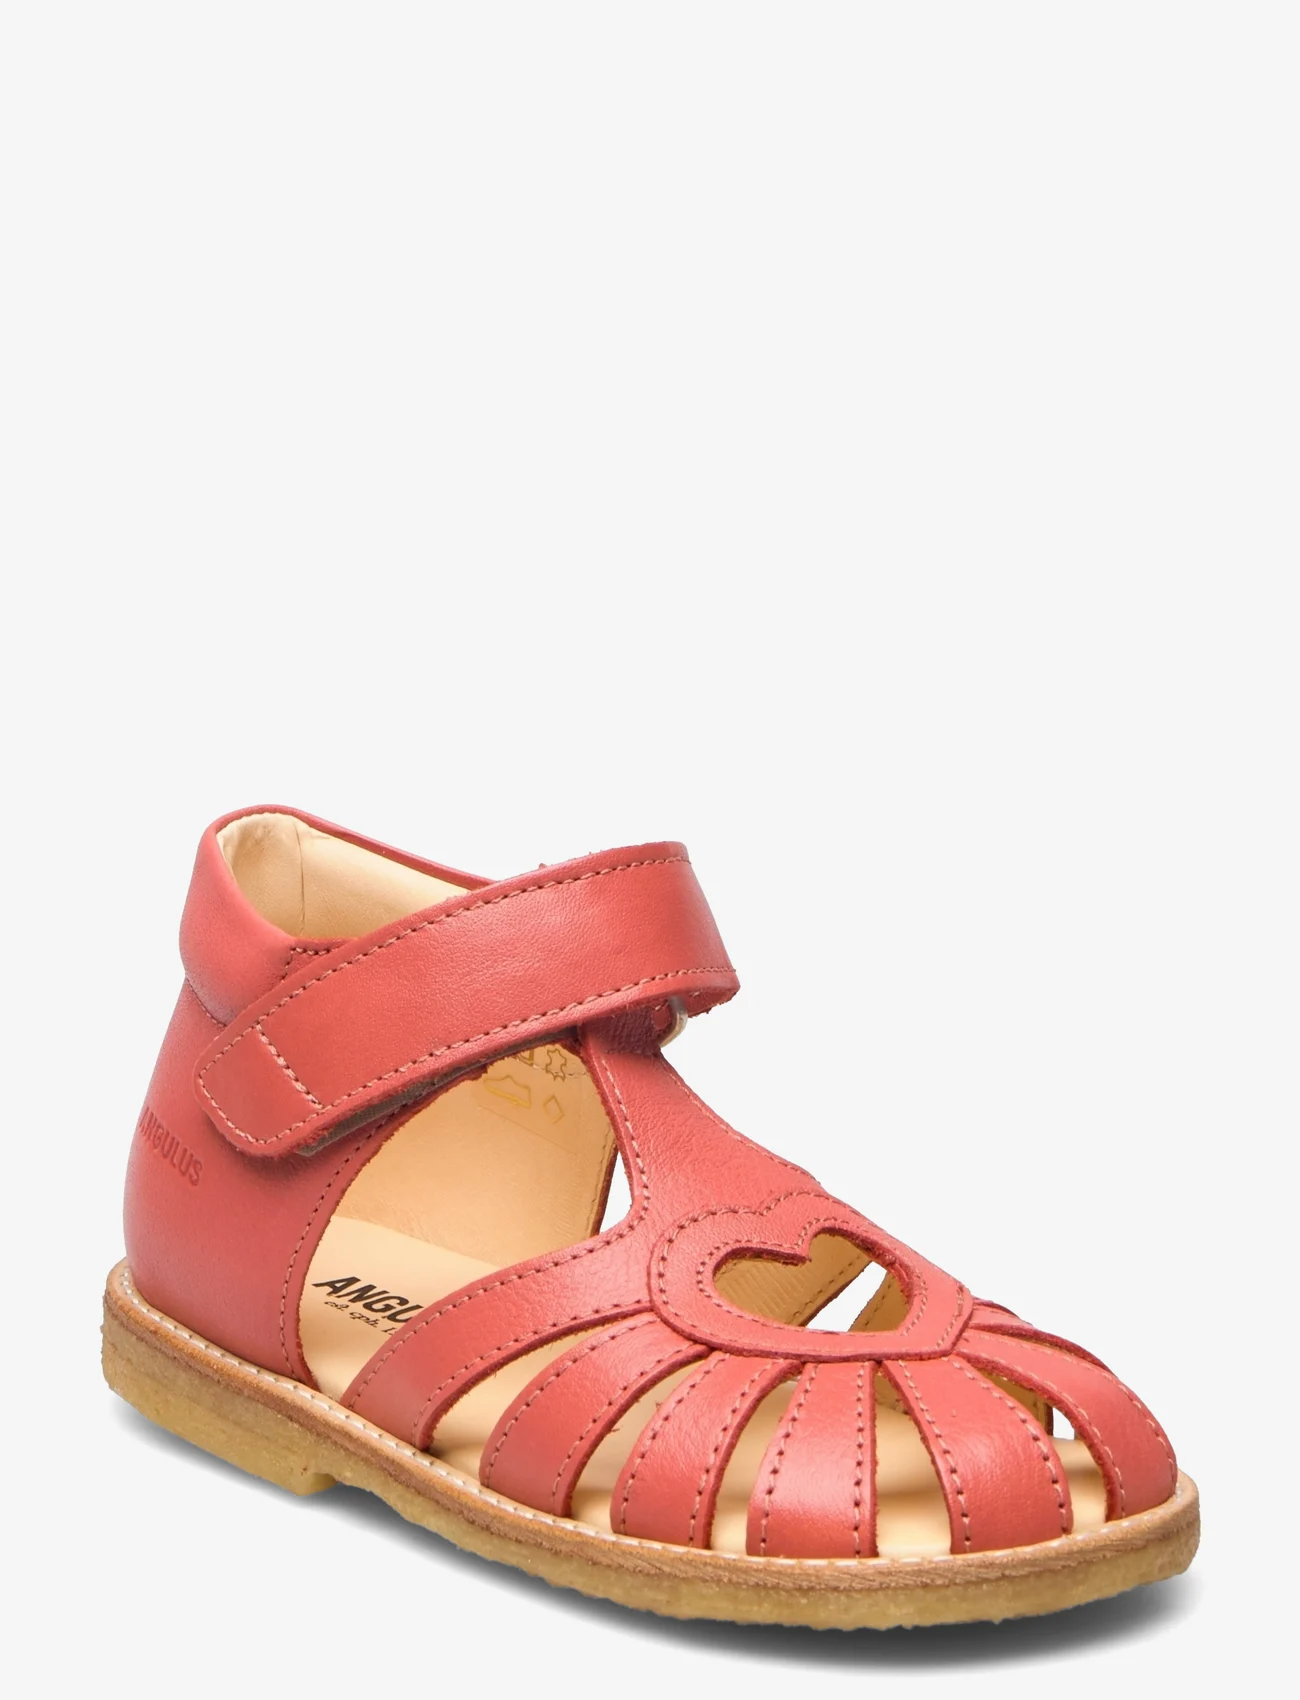 ANGULUS - Sandals - flat - closed toe - - sommarfynd - 1591 coral - 0